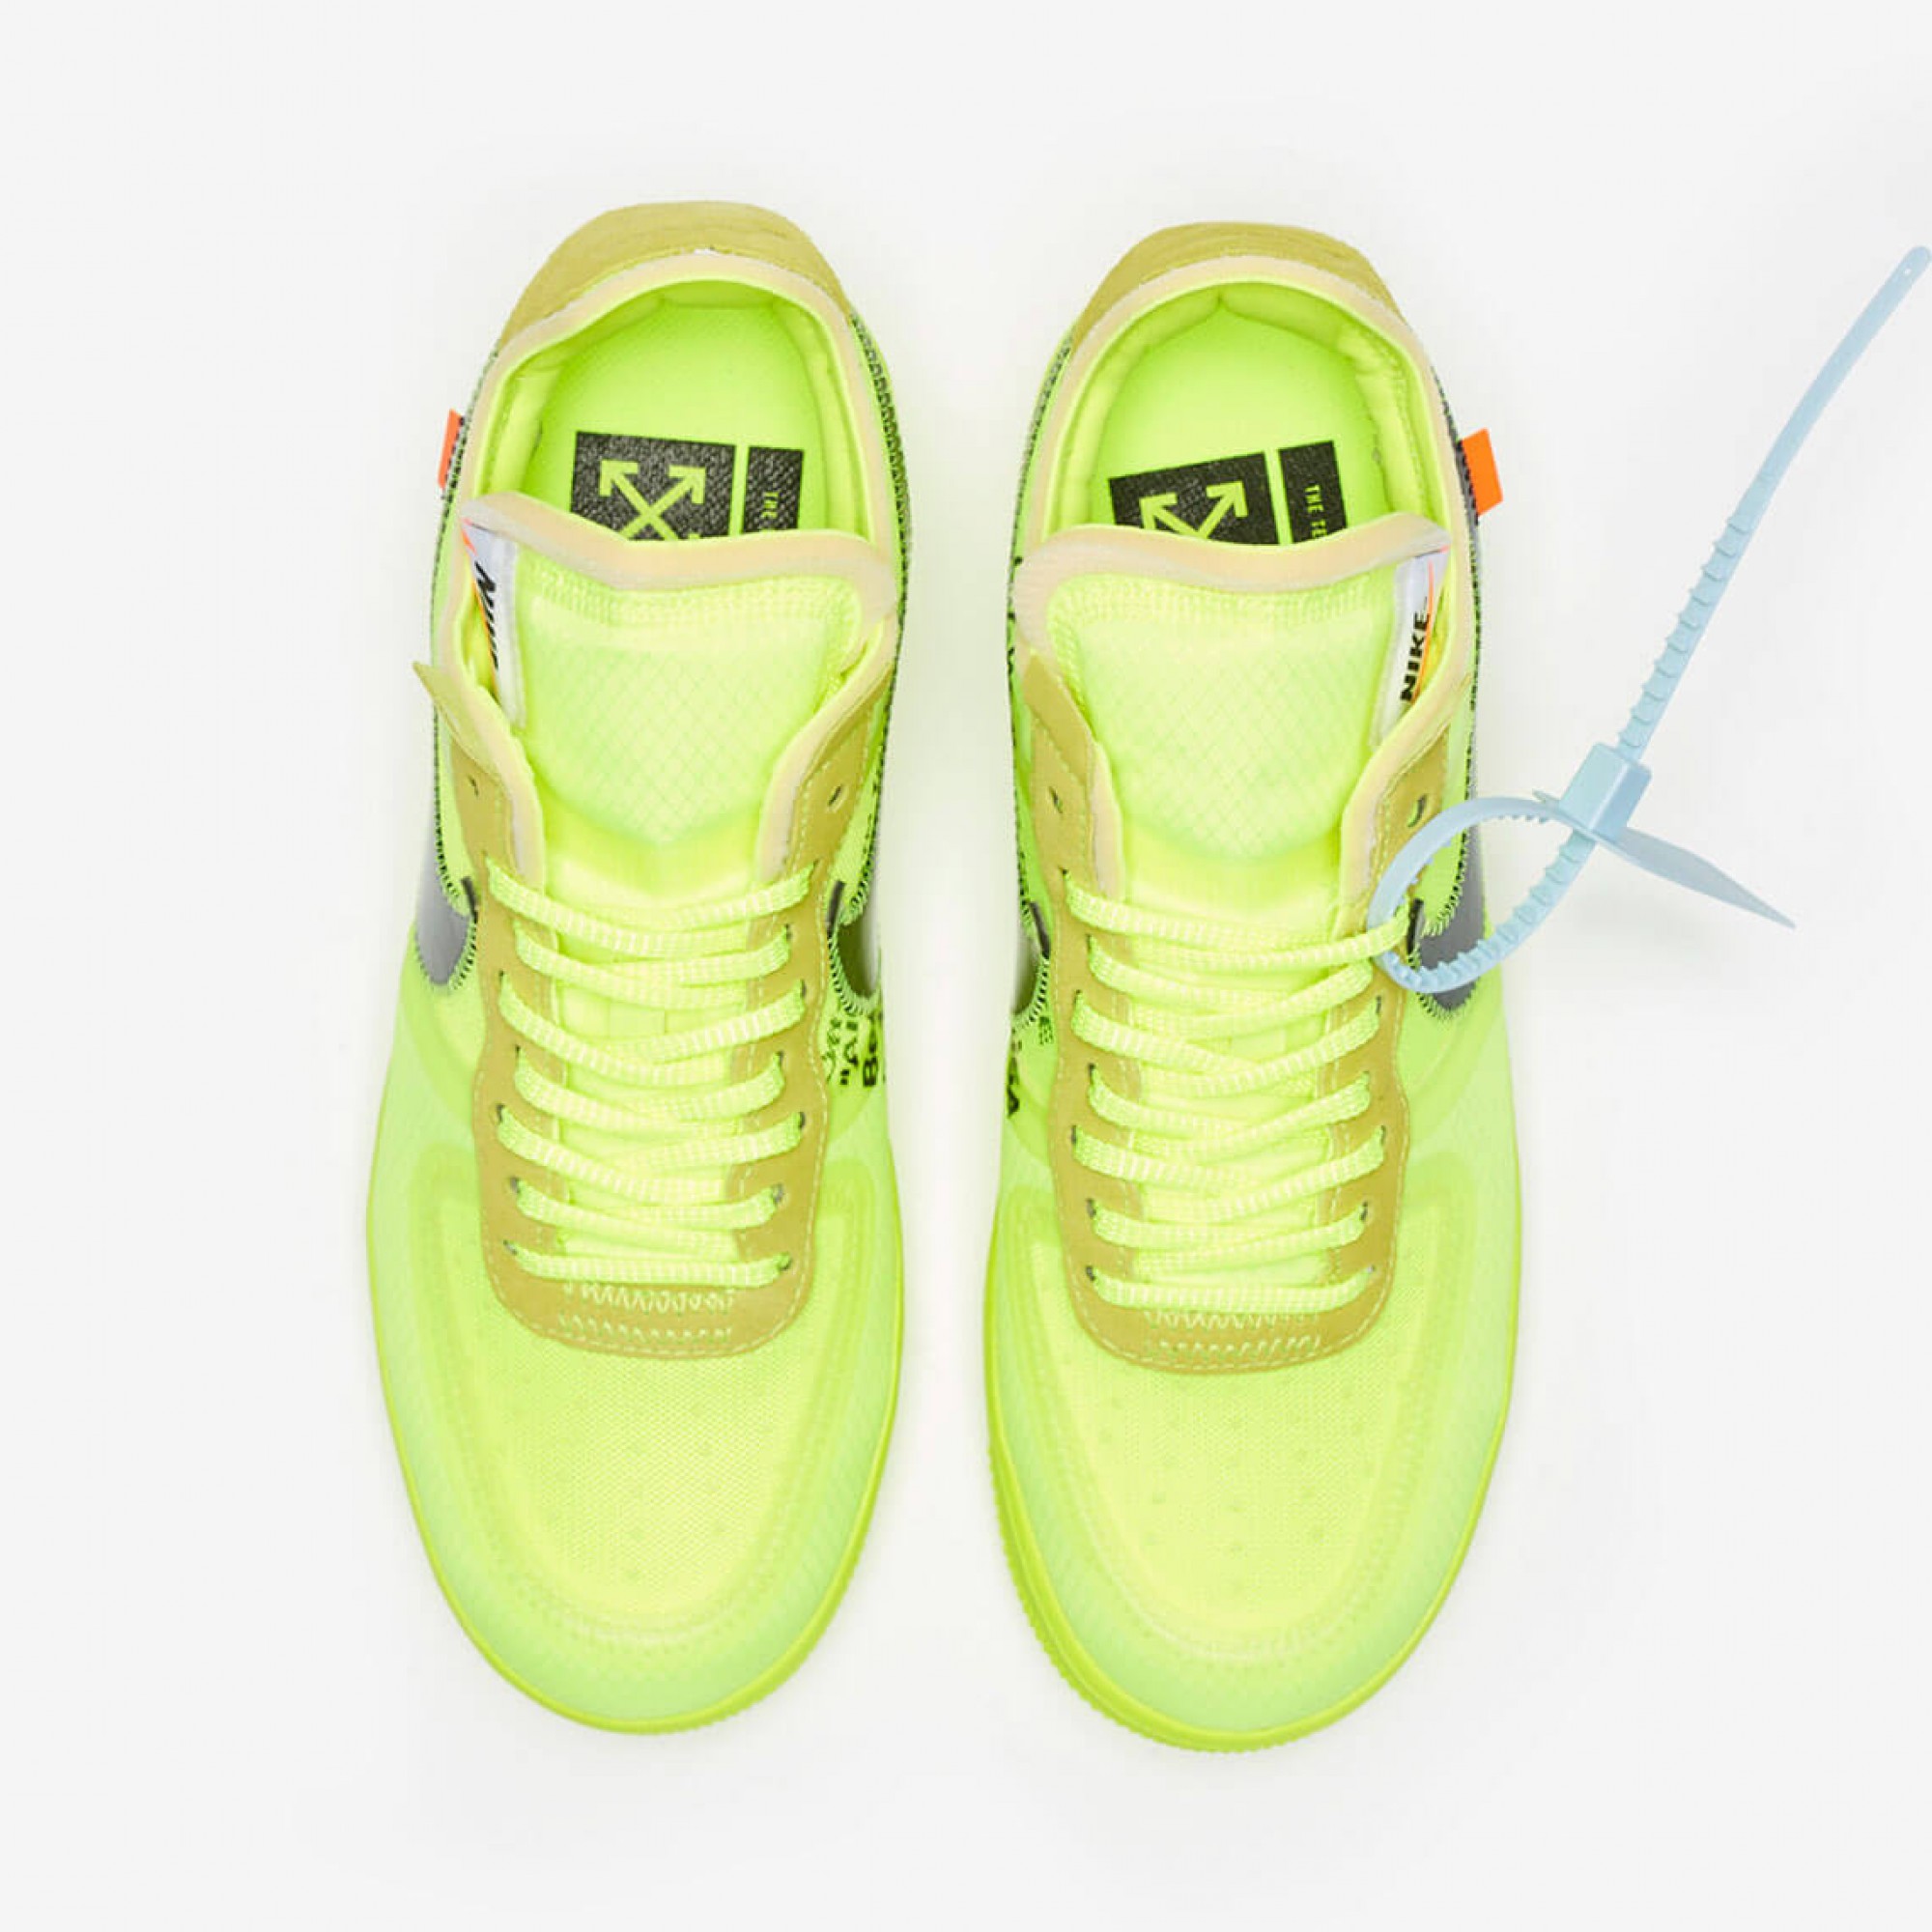 off white volt air force